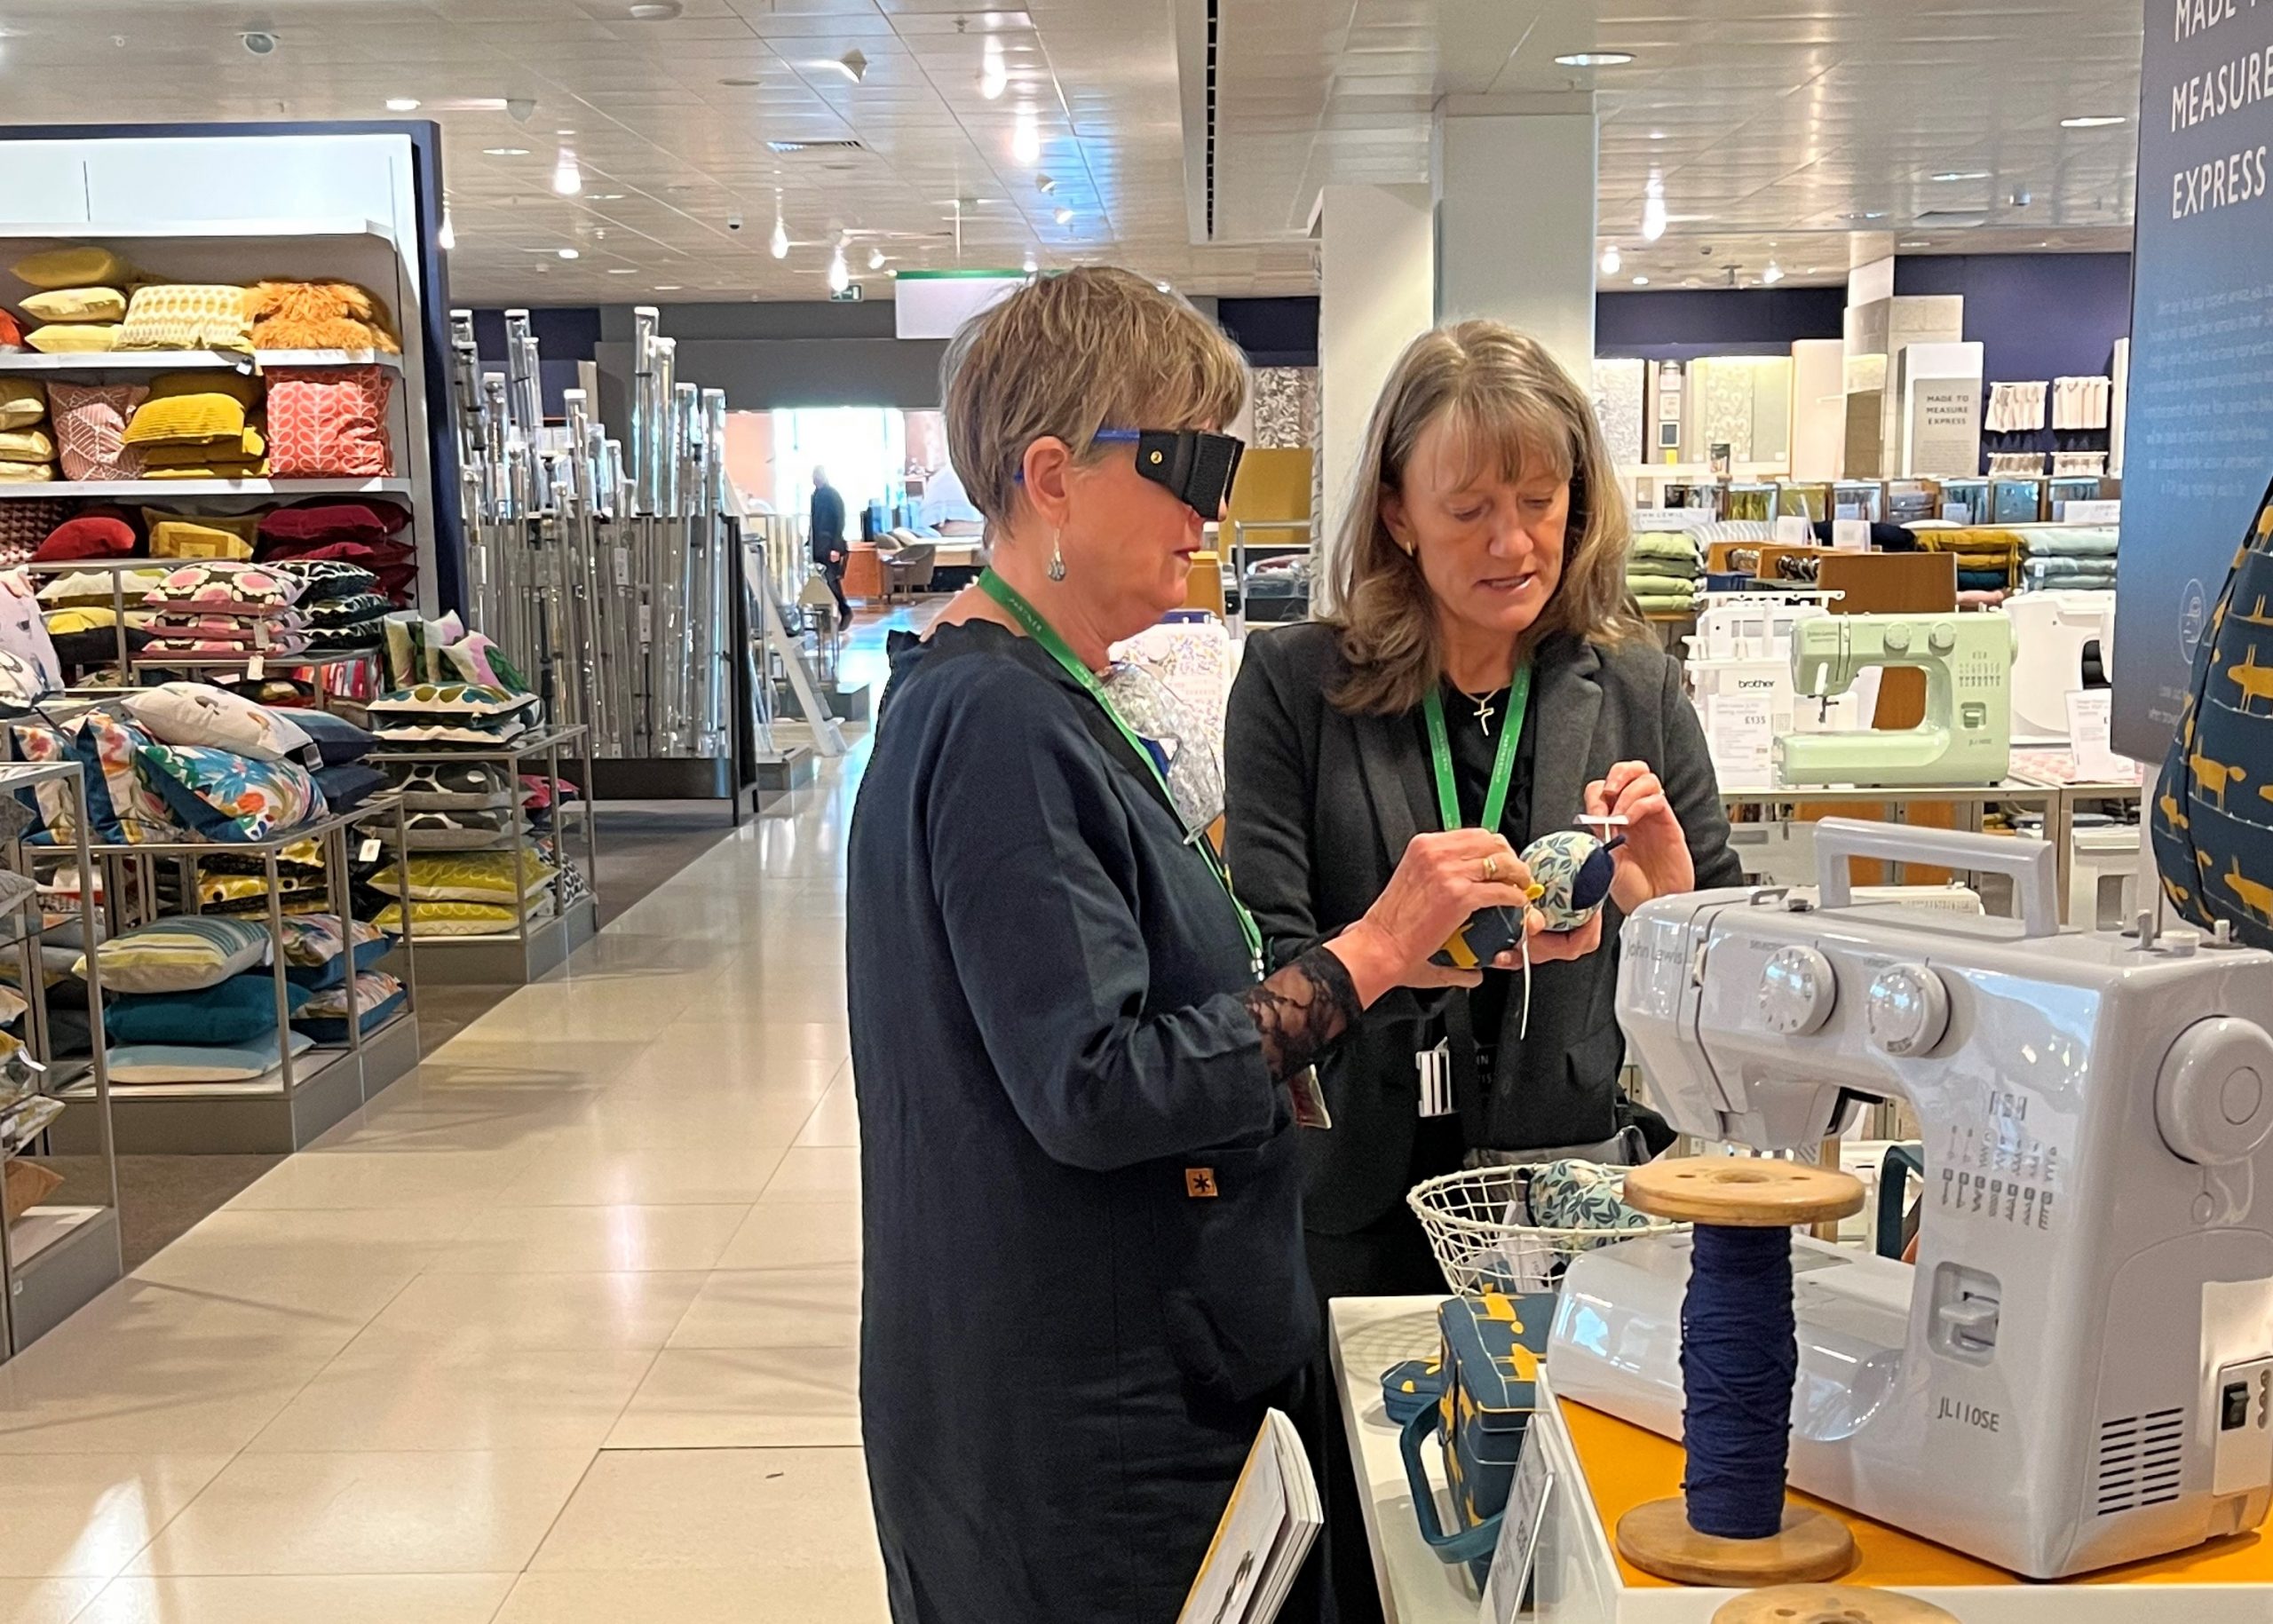 Two John Lewis staff members looking at items in the kitchen department. One is wearing sim specs and holding an item in her hand. The other is guiding and assisting her.